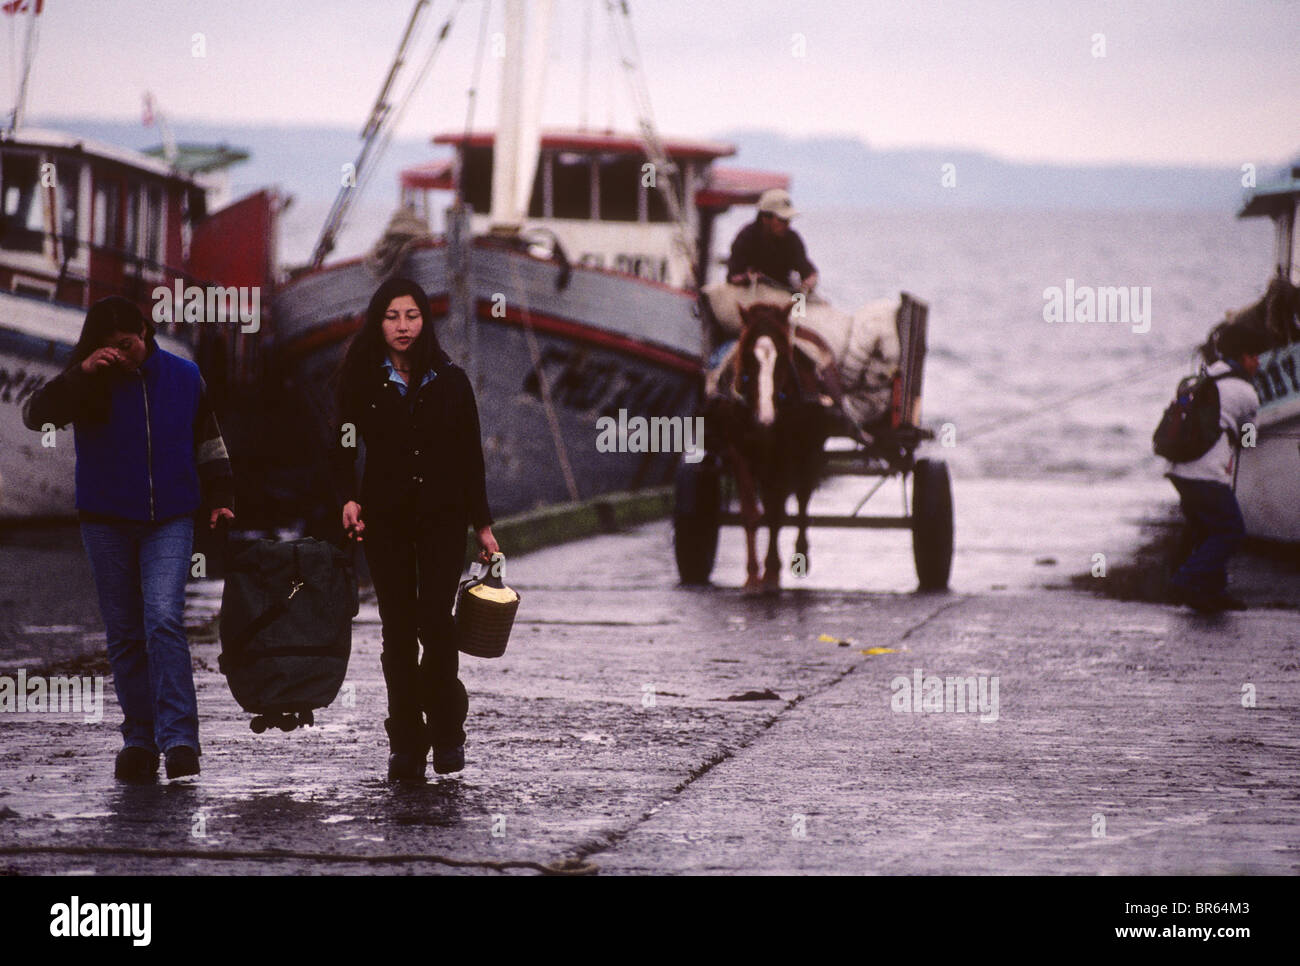 Girls on the boat Ramp at Achao Isla Quinchao ChiloŽ archipelago Stock Photo